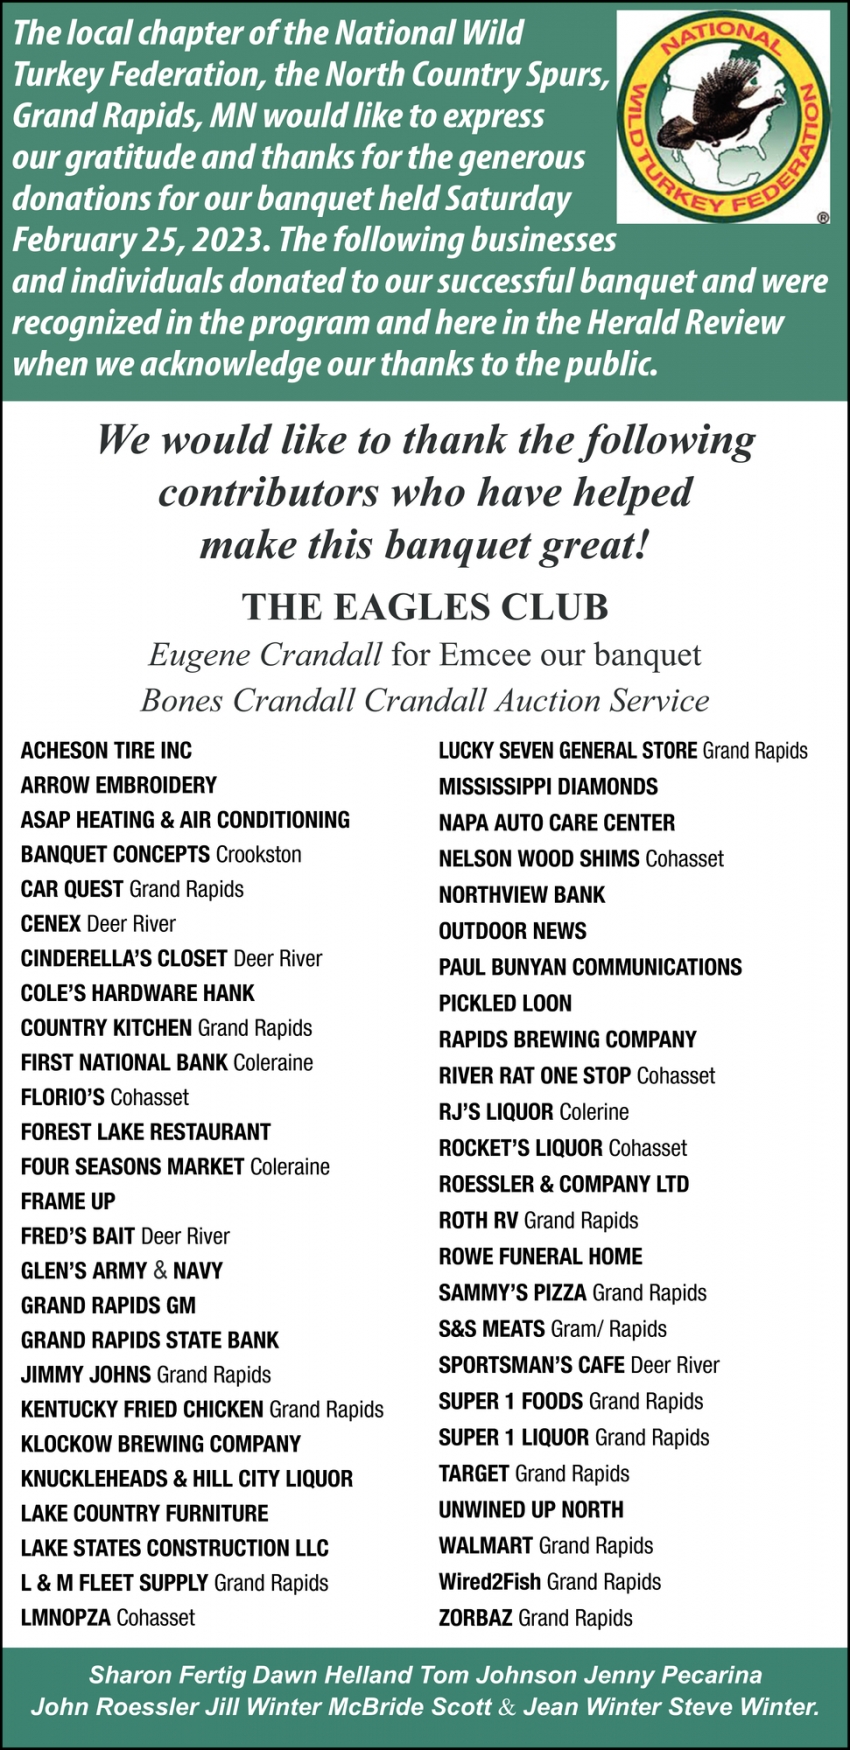 We Would Like To Thank The Following Contributors Who Have Helped Make This Banquet Great!